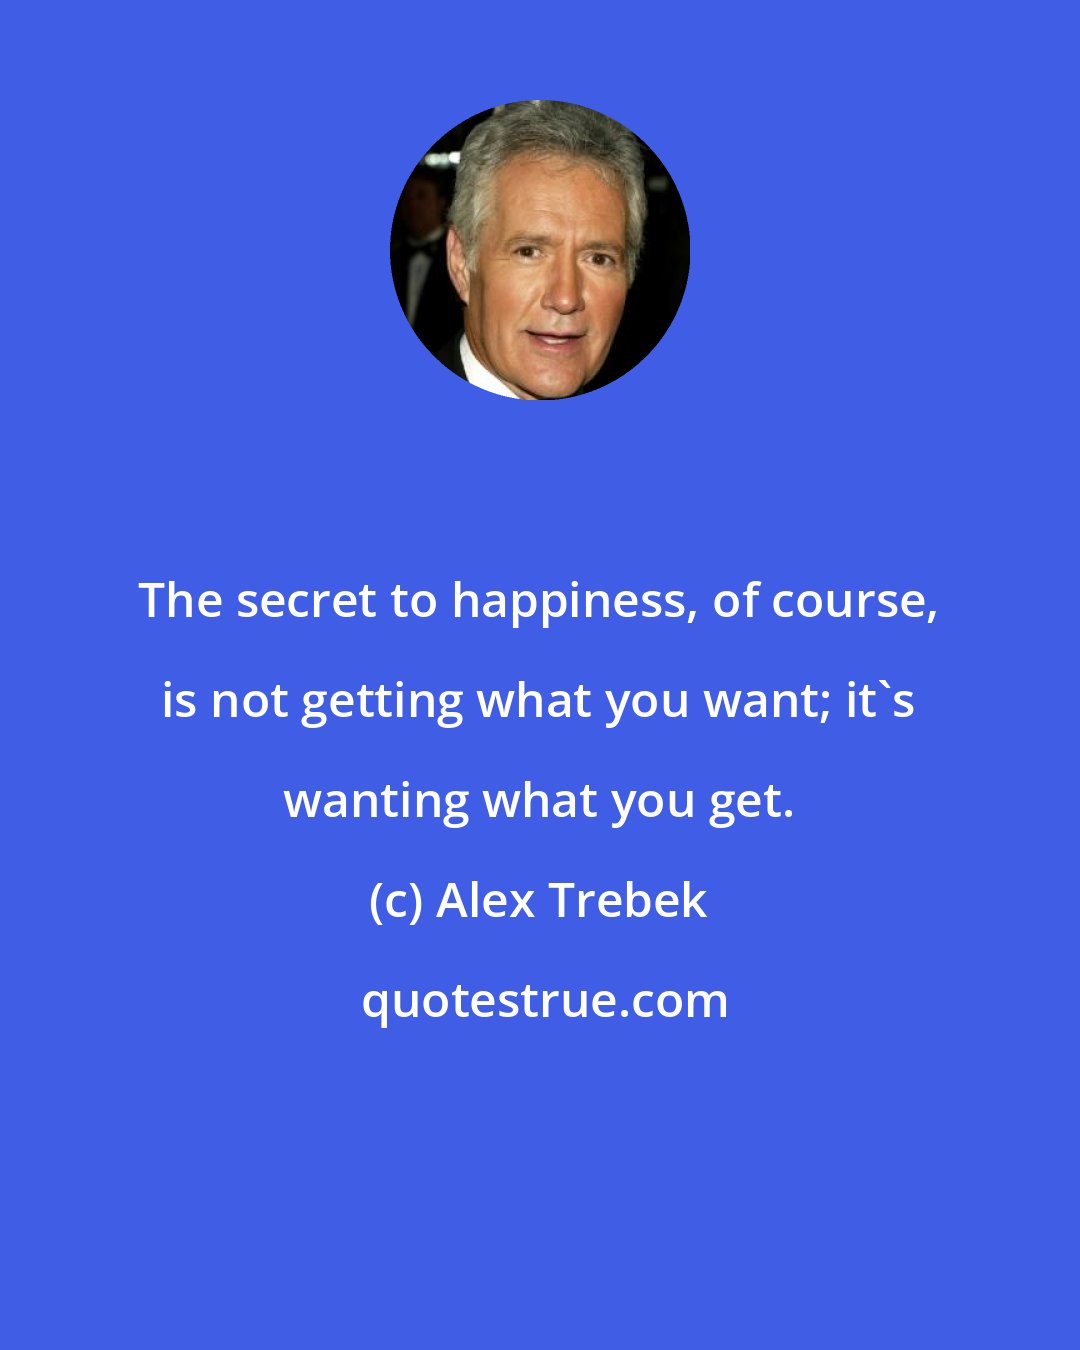 Alex Trebek: The secret to happiness, of course, is not getting what you want; it's wanting what you get.